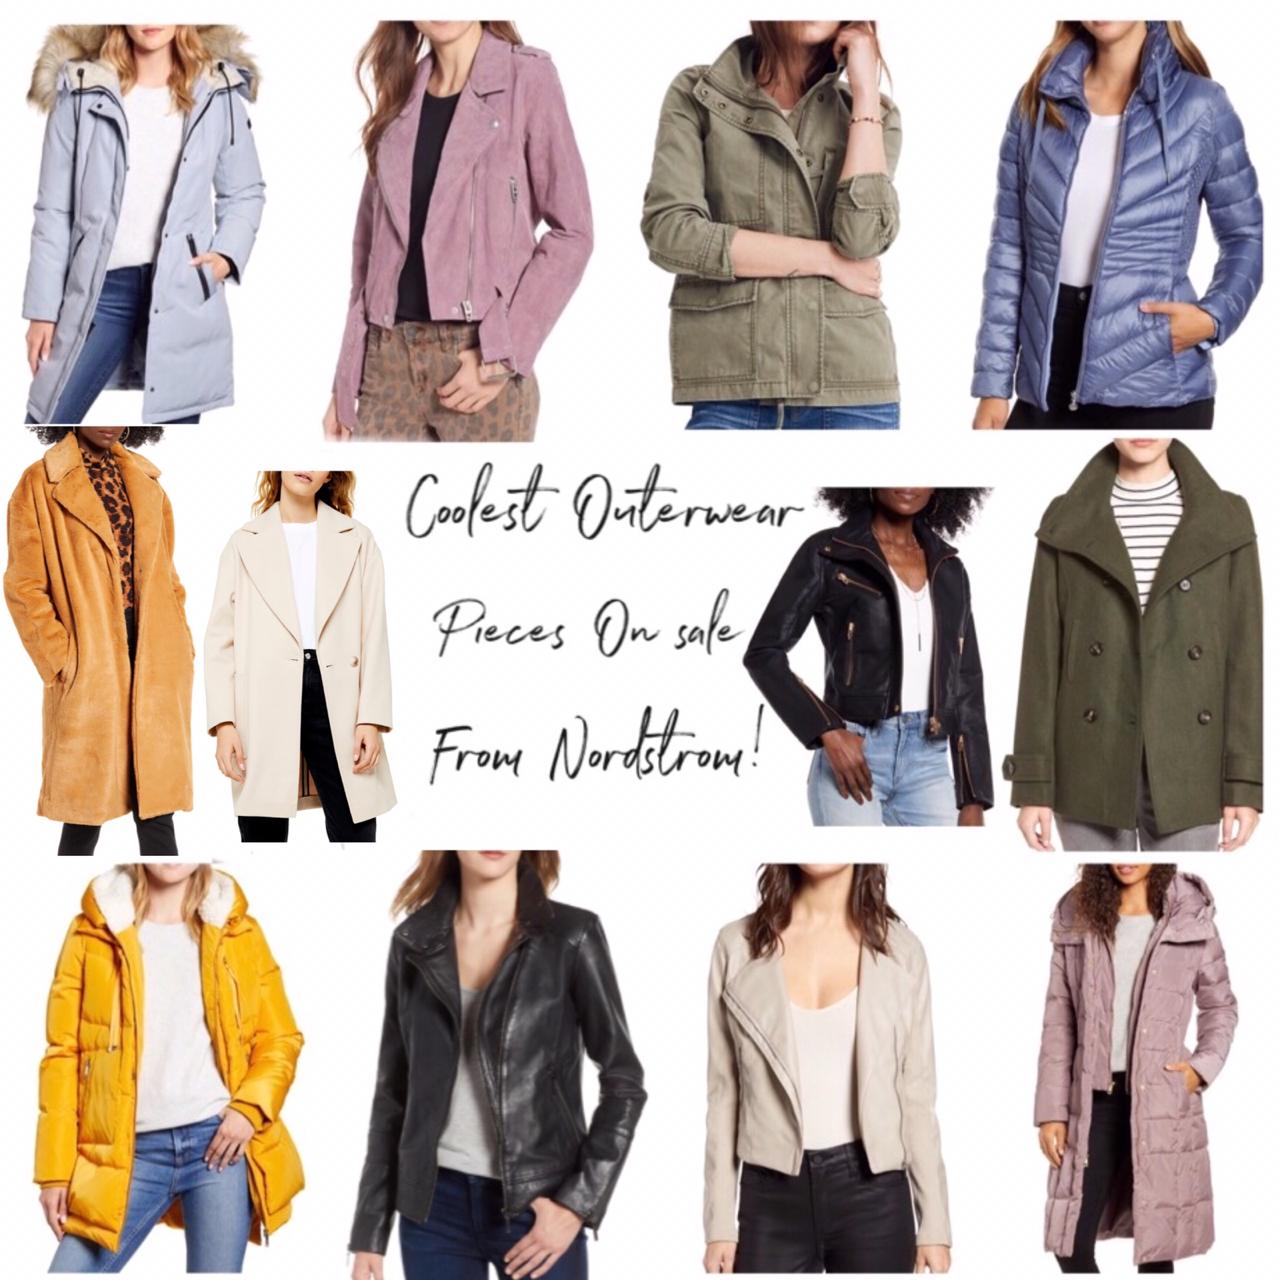 21 Coolest Outerwear Pieces On Sale From Nordstrom You Can't Miss!